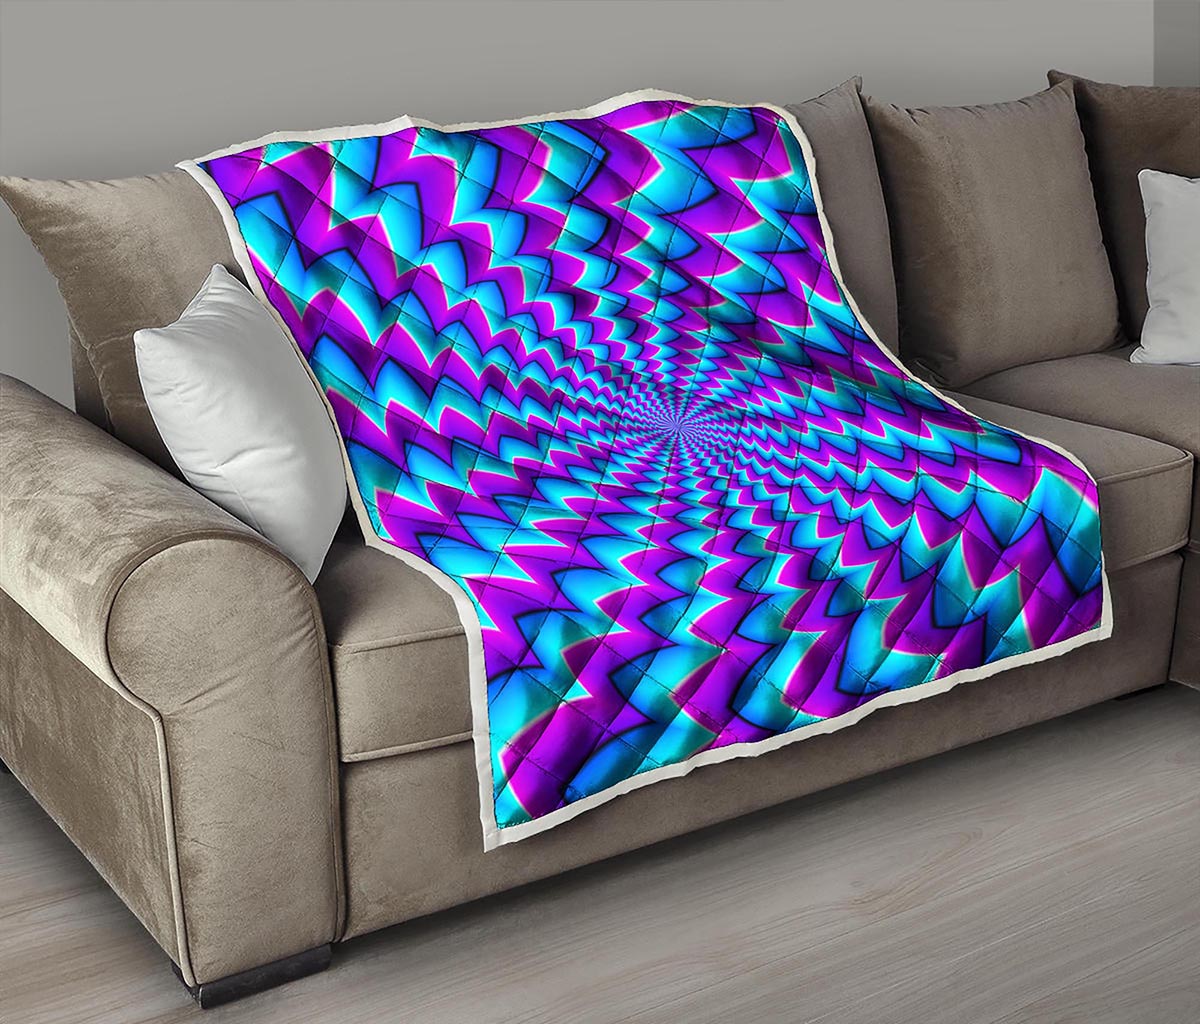 Blue Dizzy Moving Optical Illusion Quilt